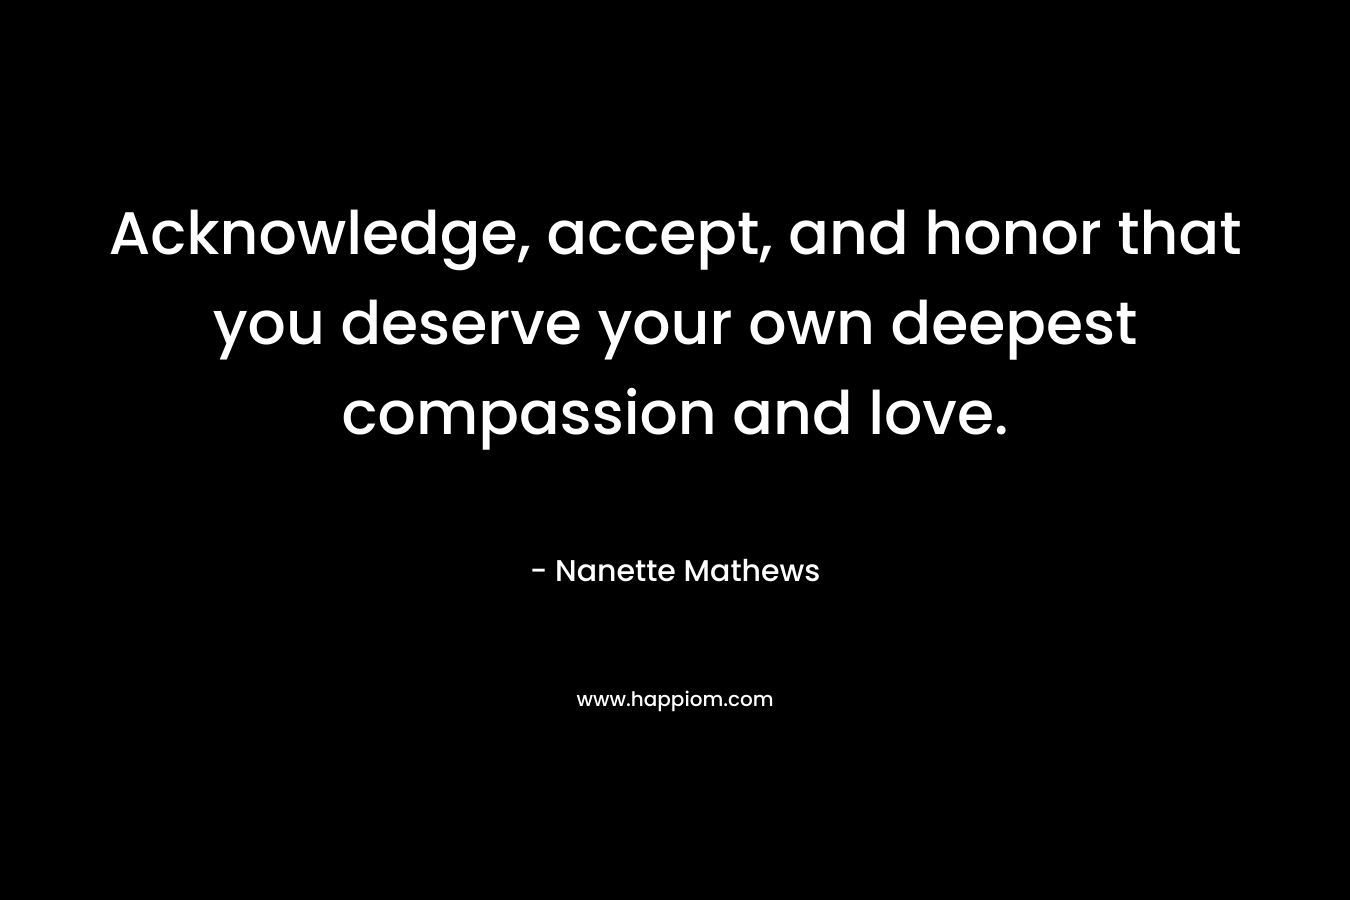 Acknowledge, accept, and honor that you deserve your own deepest compassion and love.